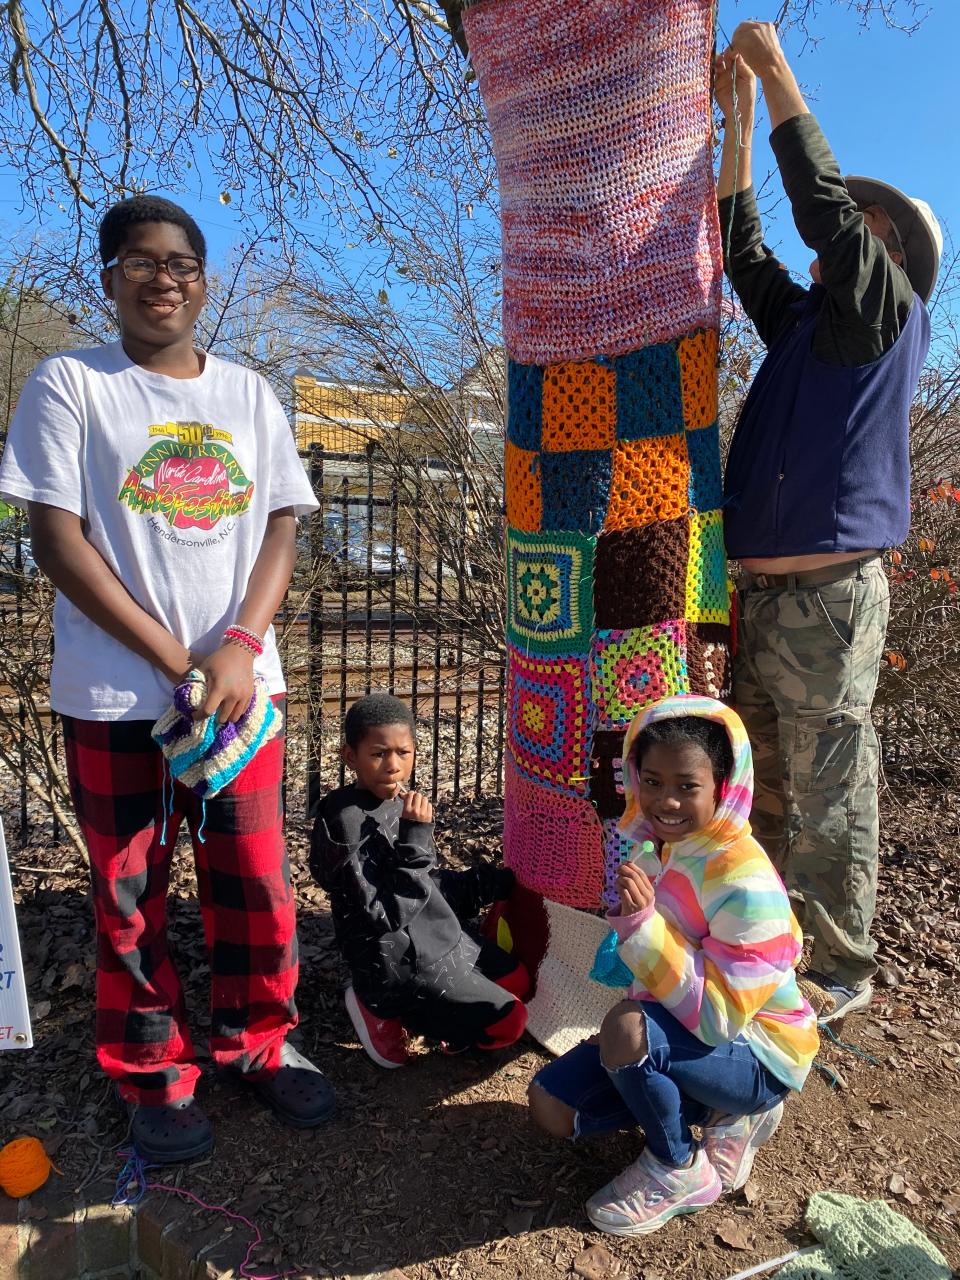 People participate in STEAP's CommuniTREES Yarn Art Project. The art is on display through early April.